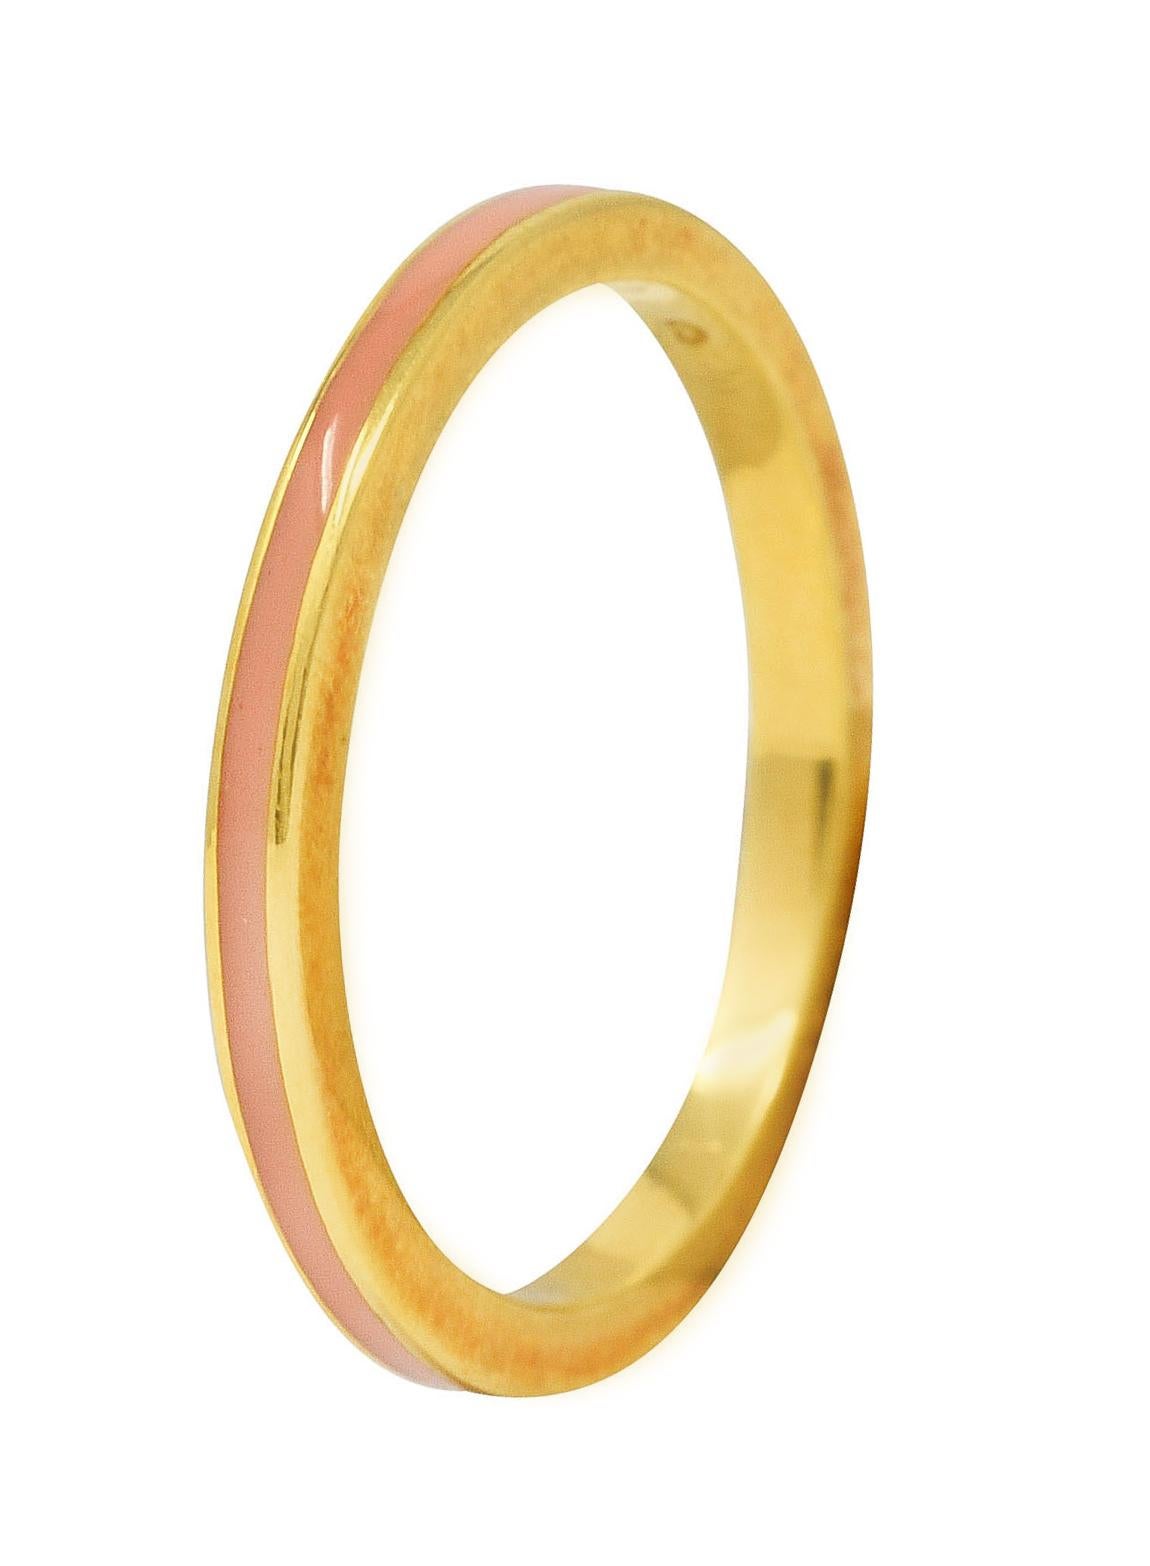 Band ring features a recessed enamel channel fully around. Glossy and opaque light peach in color. With high polished gold surround. Stamped 750 for 18 karat gold. Fully signed with maker's mark for Hidalgo. Circa: 1990's. Ring size: 6 1/2 and not